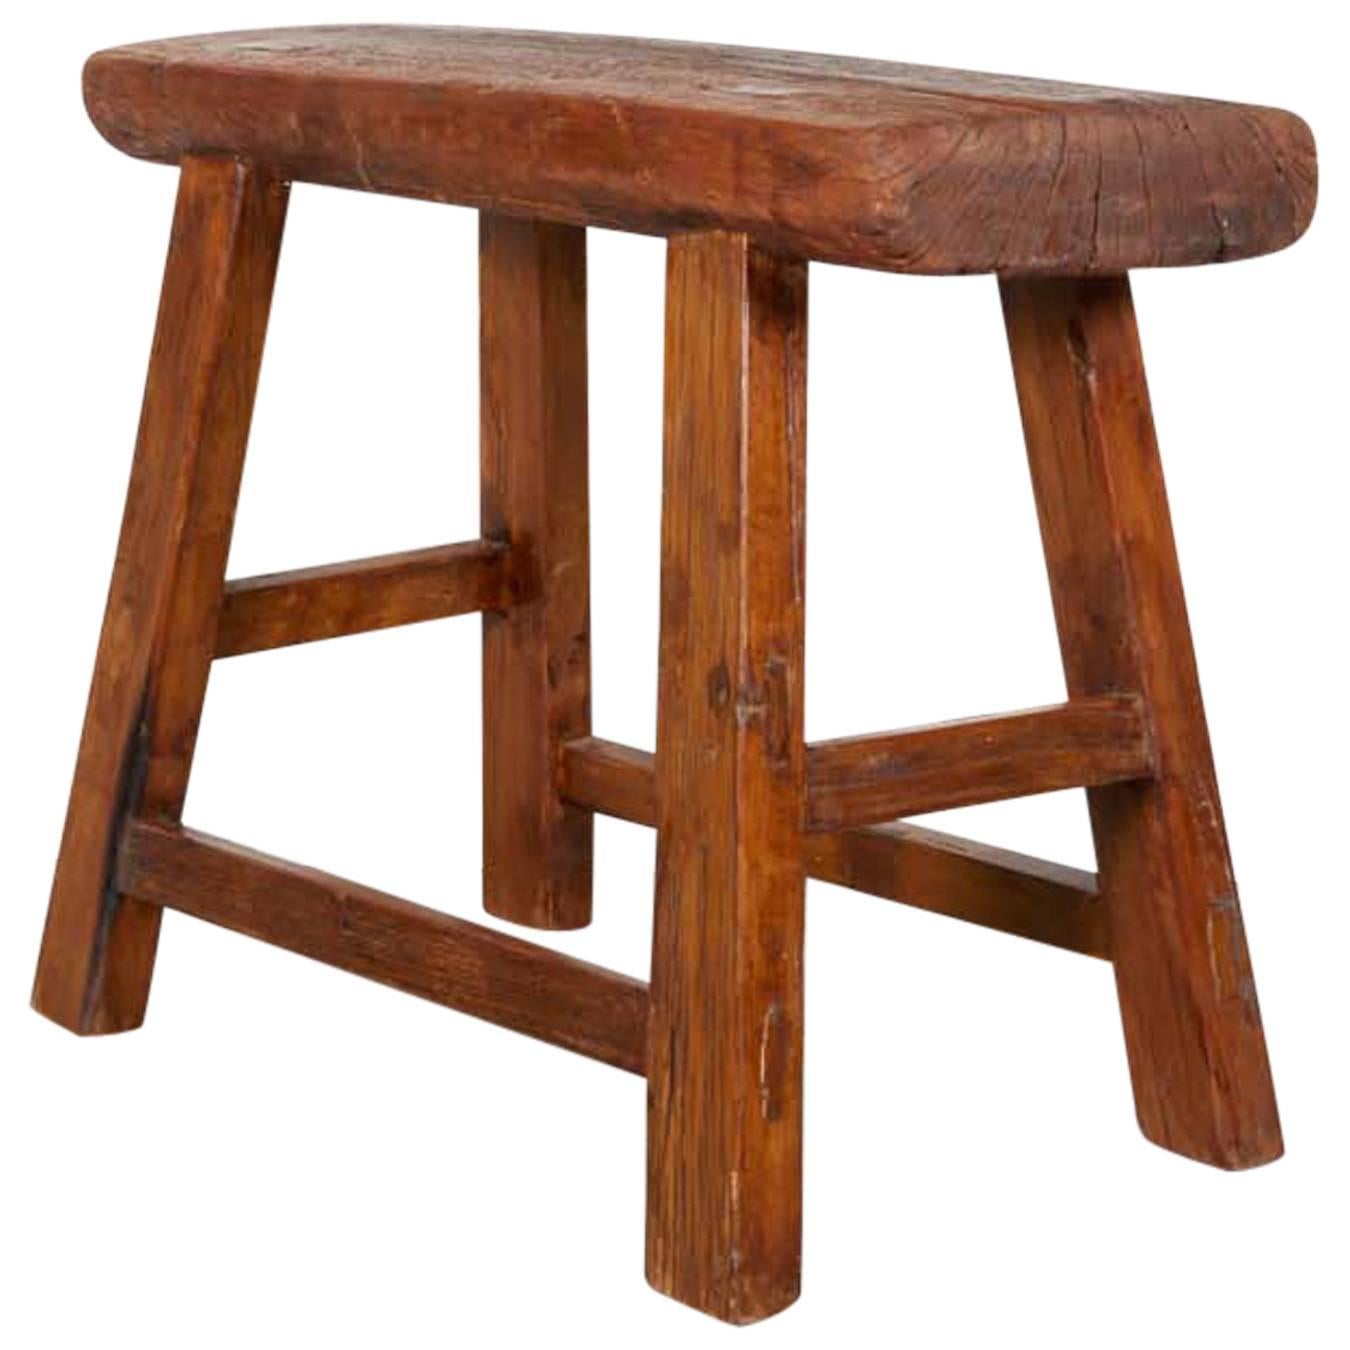 Large Antique Stool with Thick Seat